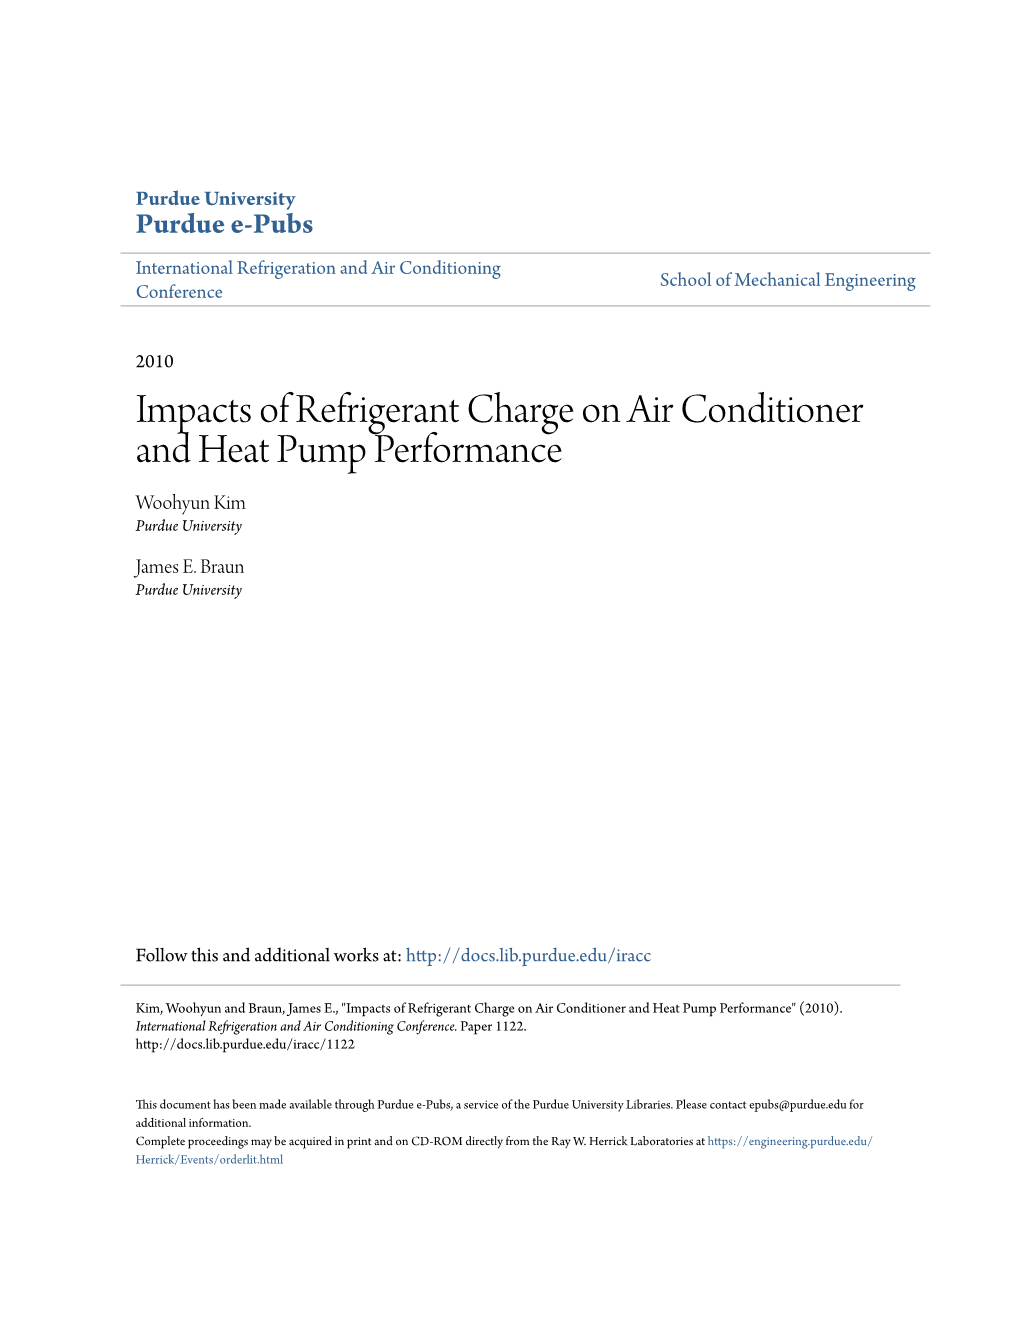 Impacts of Refrigerant Charge on Air Conditioner and Heat Pump Performance Woohyun Kim Purdue University